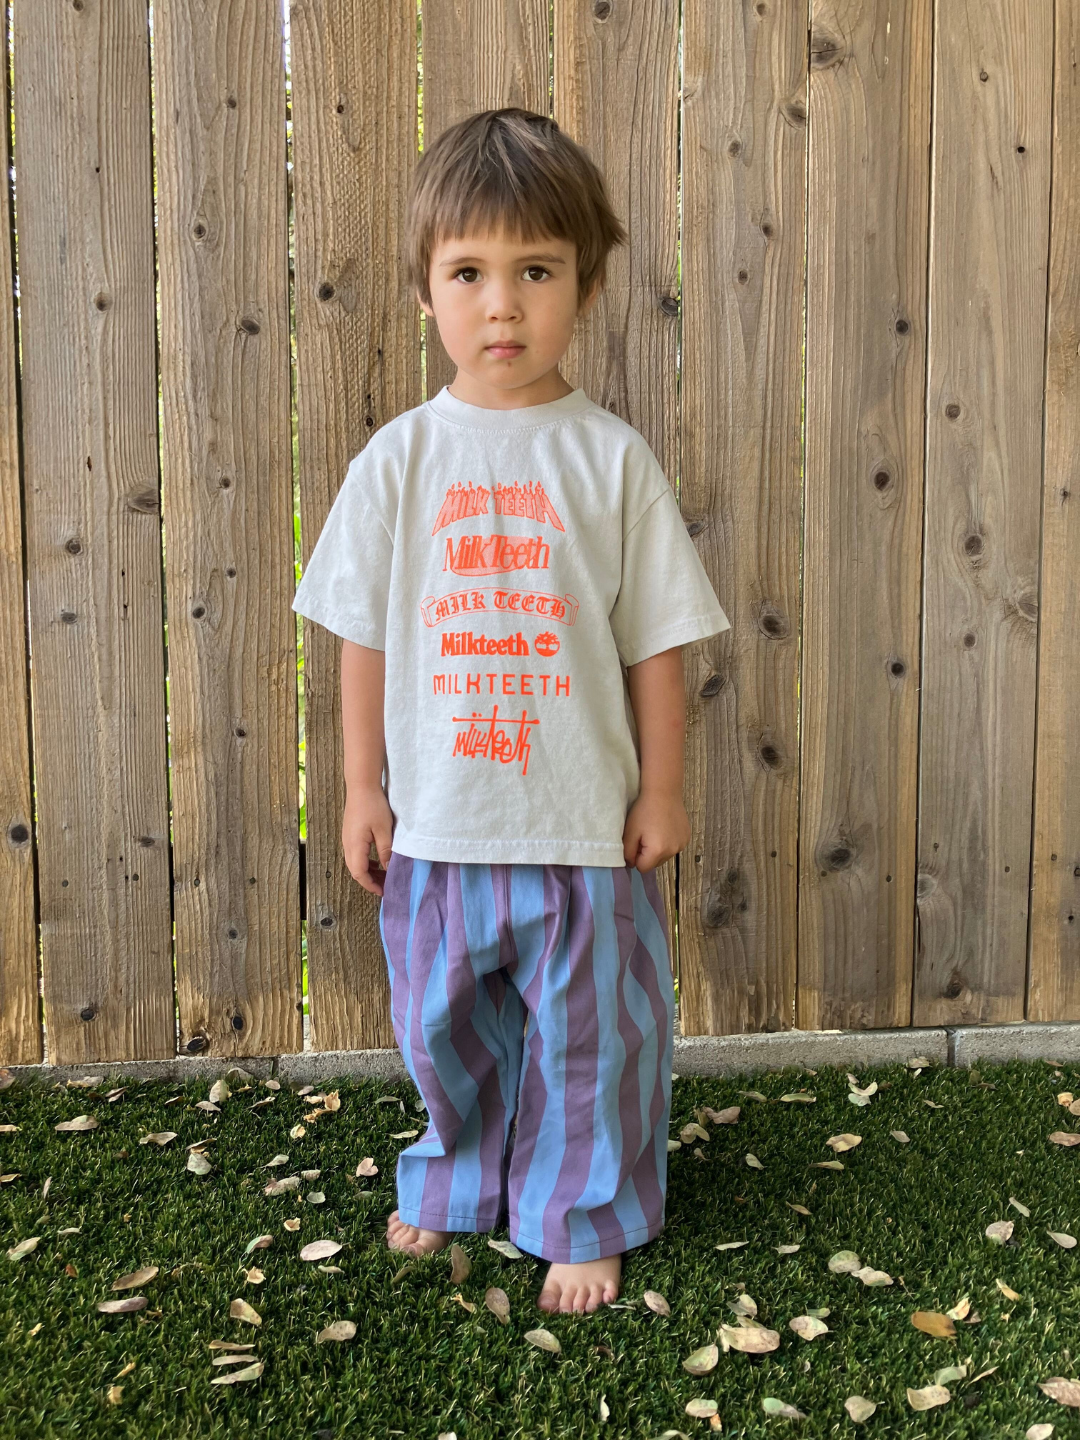 Green | A child wearing a light grey t-shirt with Milk Teeth spelled out in various fonts in orange. He wears striped pants, is barefoot, and stands on grass against a wooden fence.